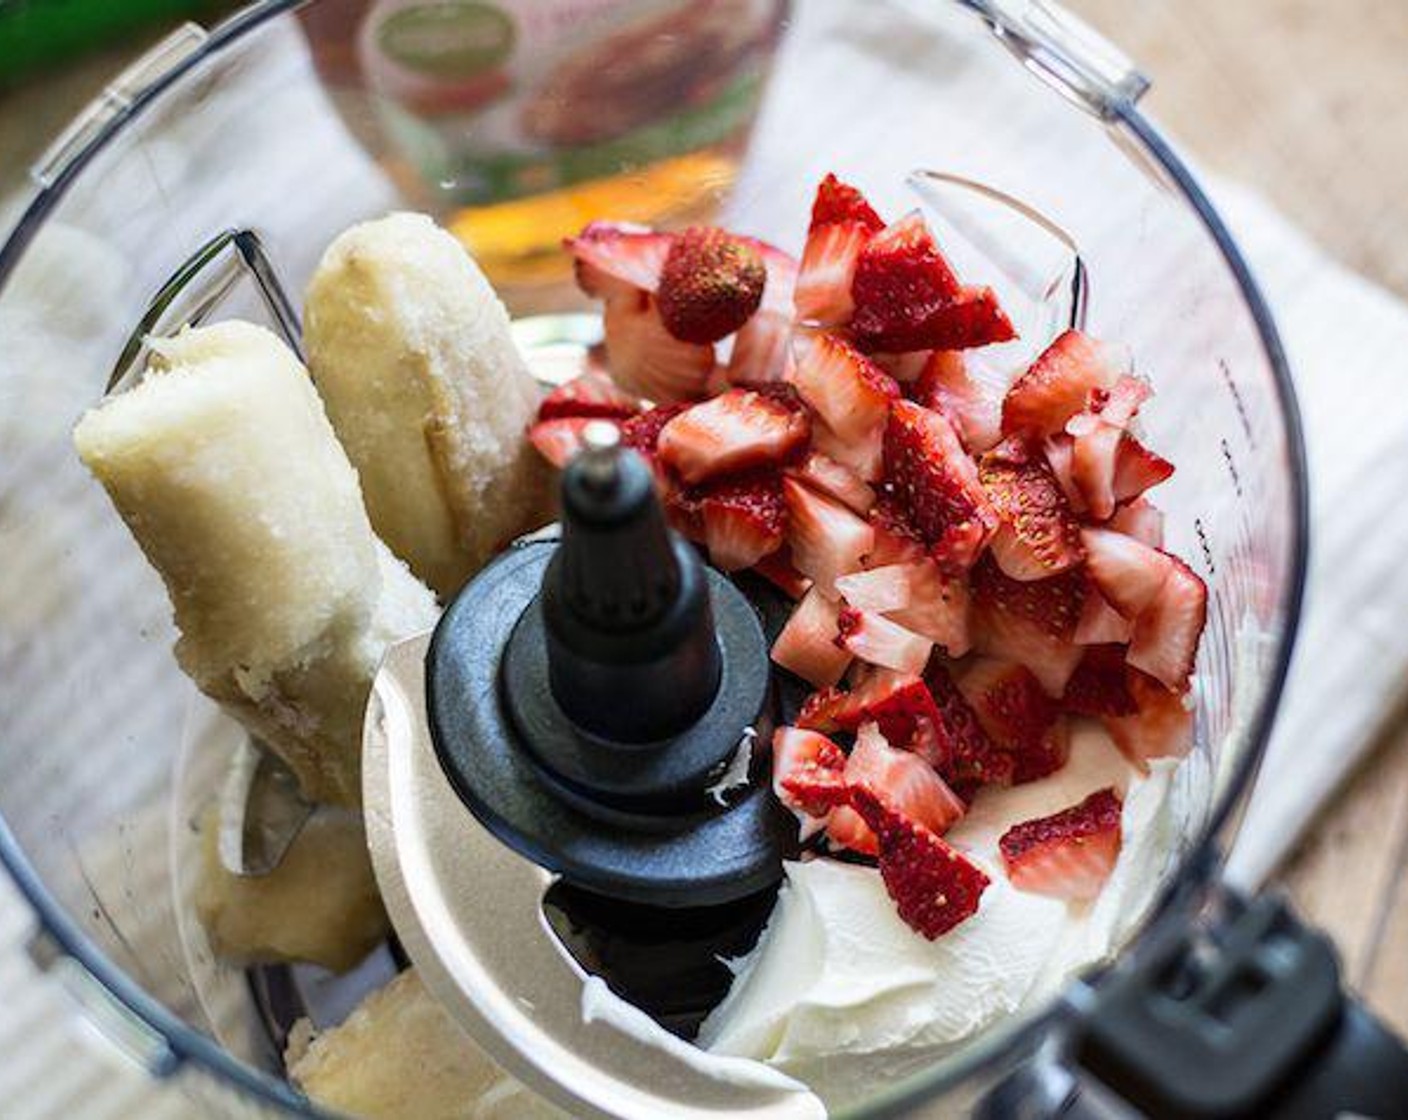 step 1 Add Fresh Strawberry (3/4 cup) to a bowl of a food processor, followed by Banana (1), Philadelphia Original Soft Cheese (1/2 cup), Maple Syrup (2 Tbsp), Whole Milk (1/4 cup), Organic Sweet Cream Coffee Creamer (1/4 cup) and the juice from Lemon (1).